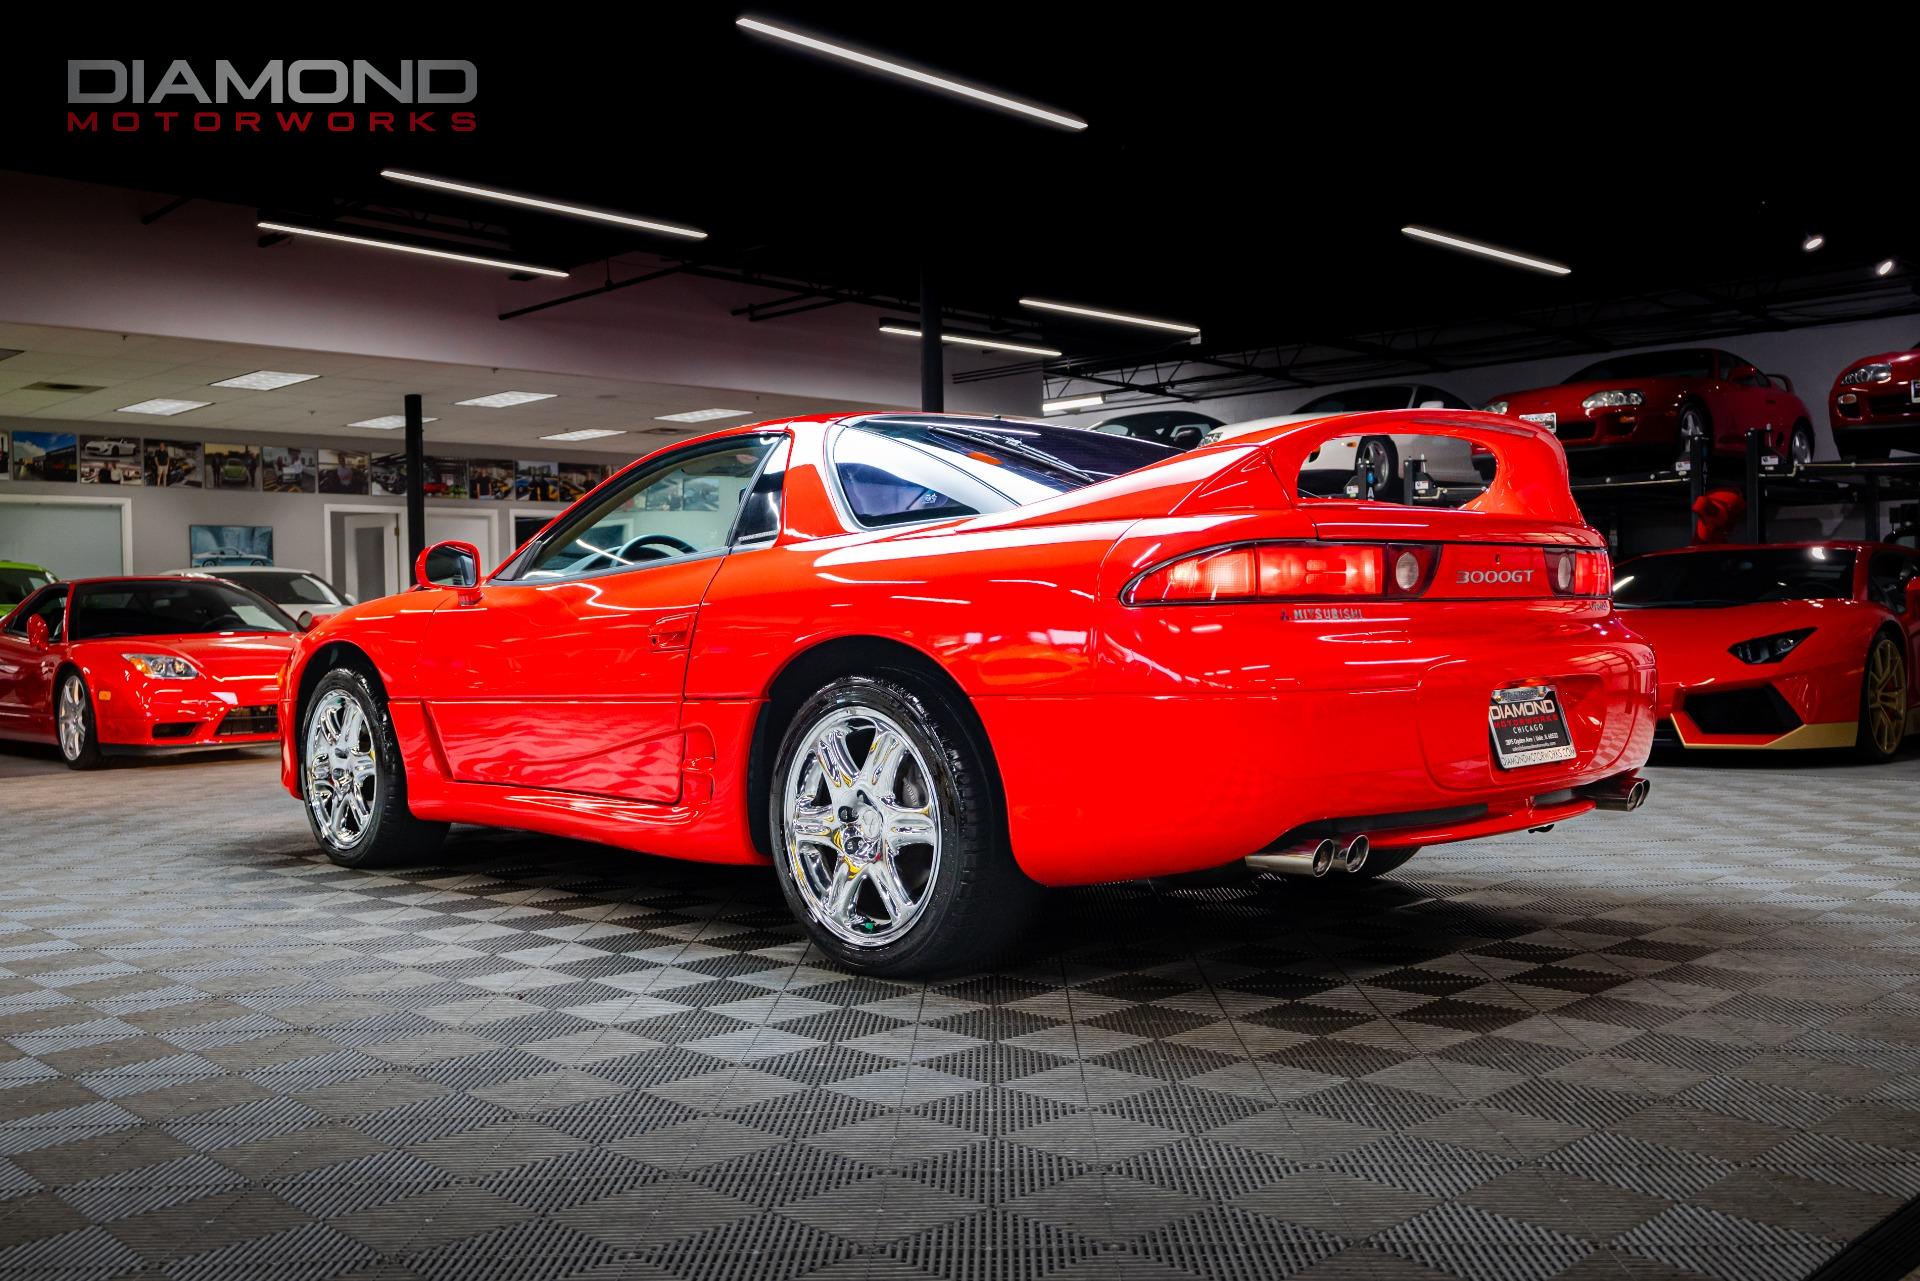 Used 1997 Mitsubishi 3000GT VR-4 Turbo For Sale ($21,800 